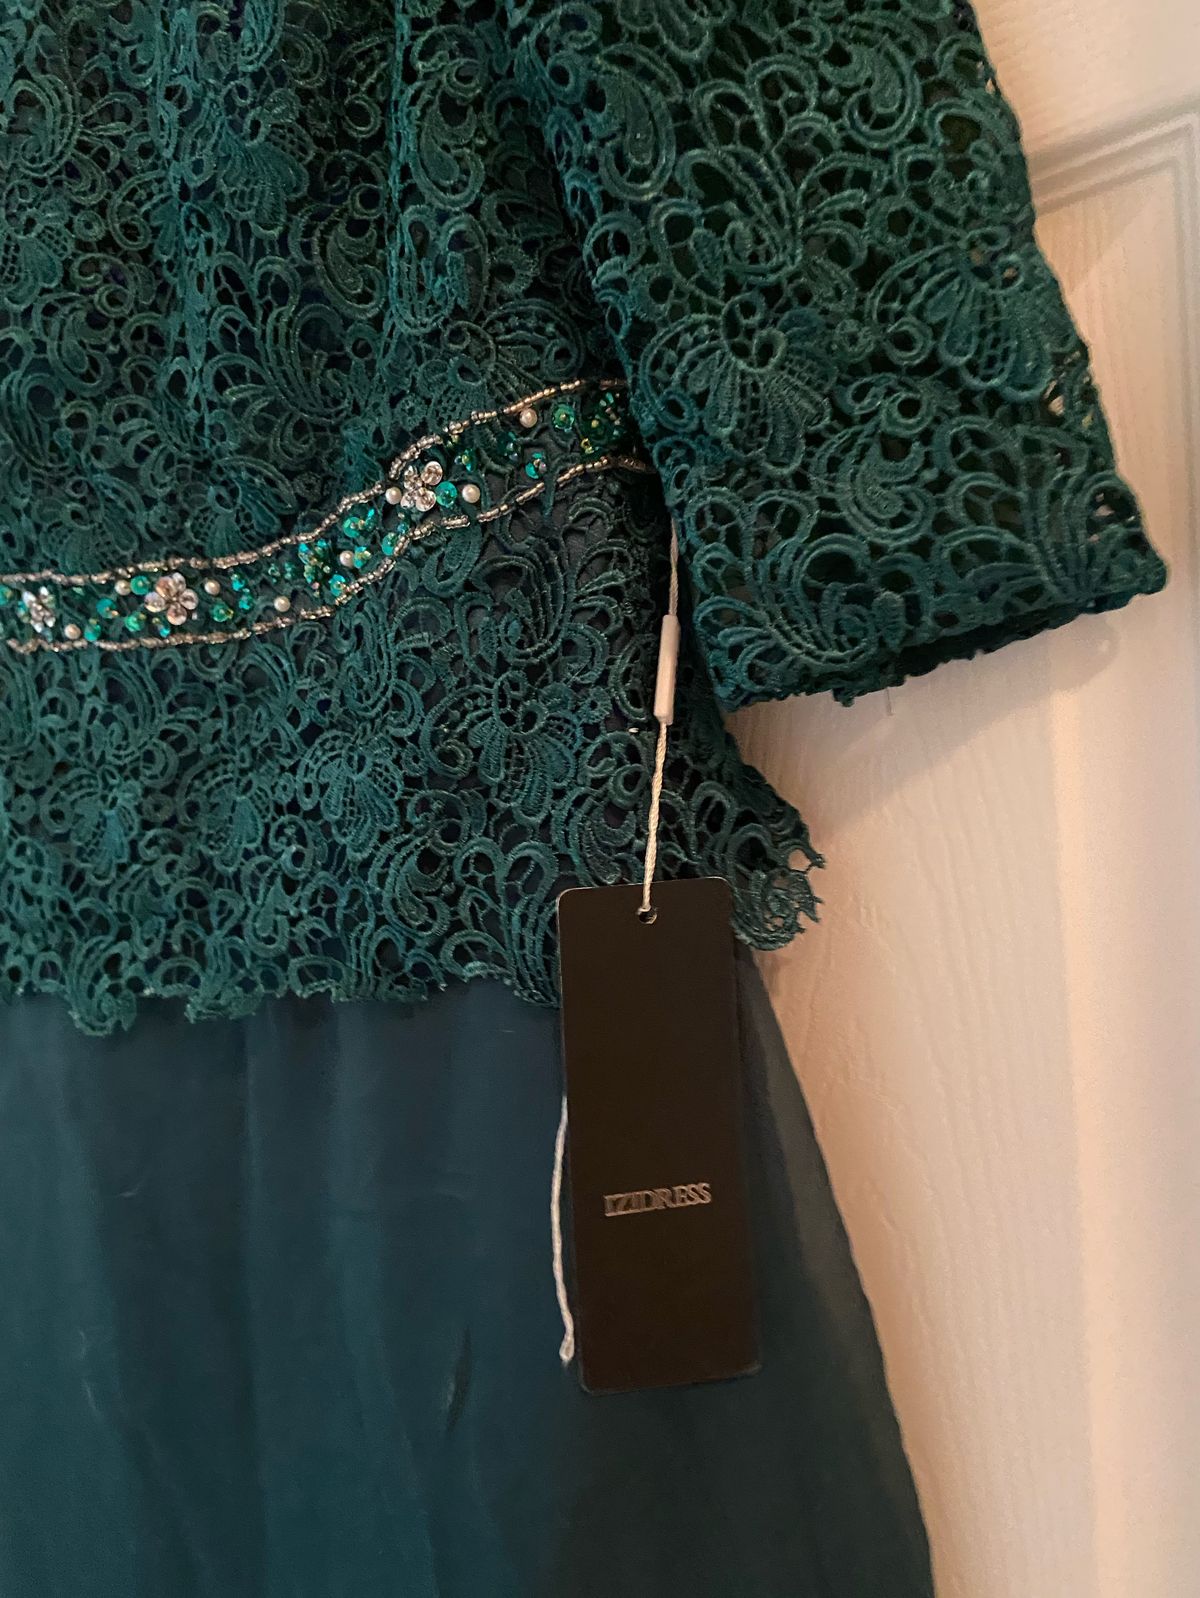 Size 10 Green Ball Gown on Queenly